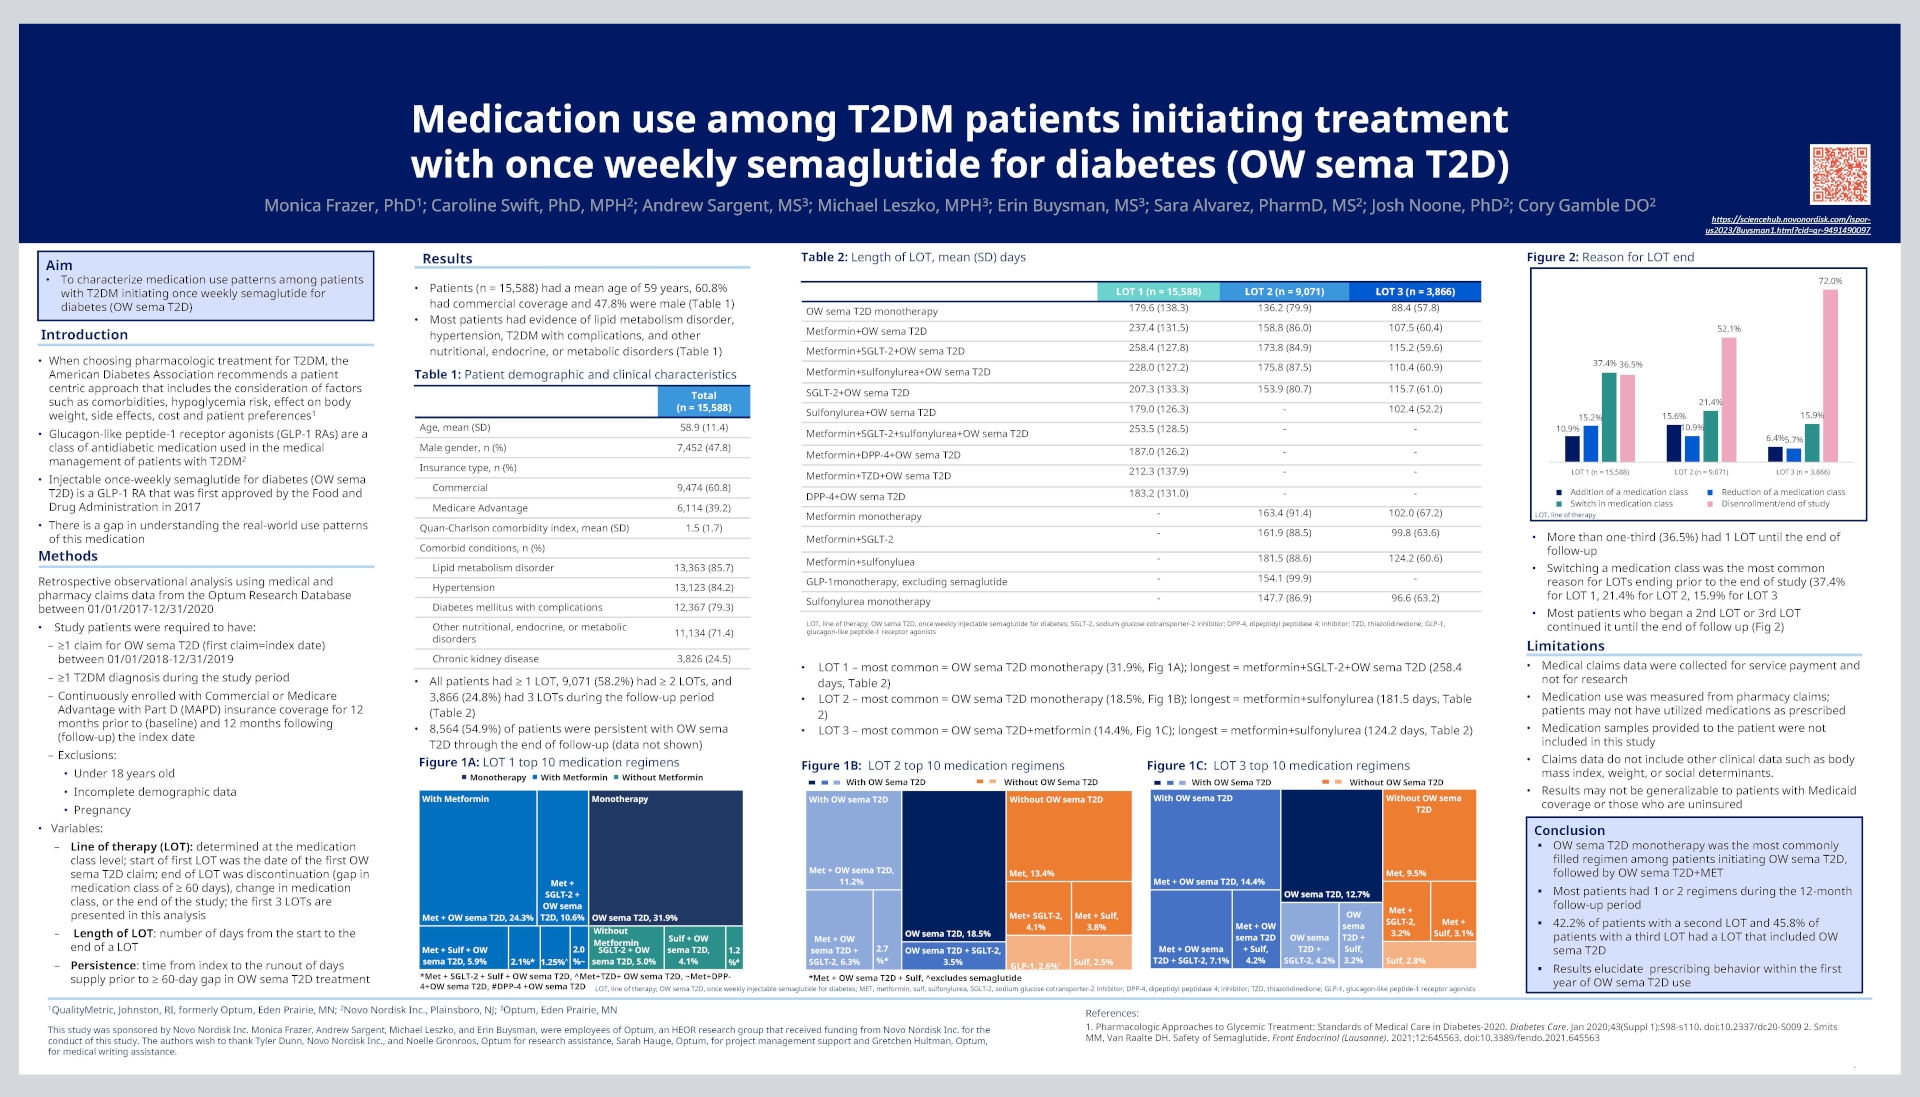 Medication use among T2DM patients initiating treatment with once weekly semaglutide for diabetes (OW sema T2D) - poster